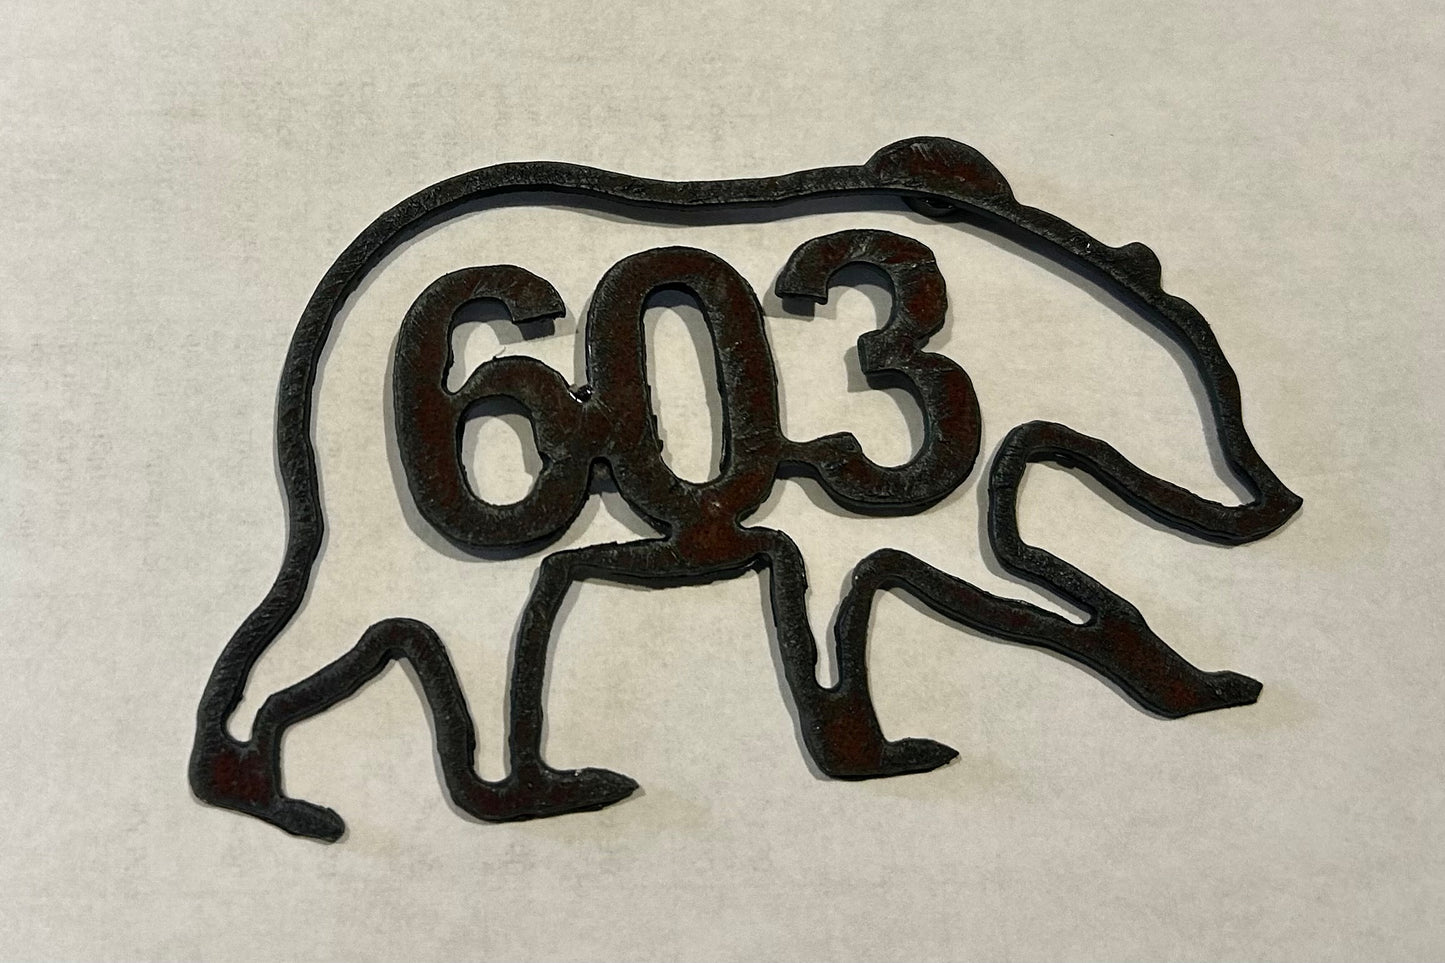 Grizzly Bear Magnet with 603